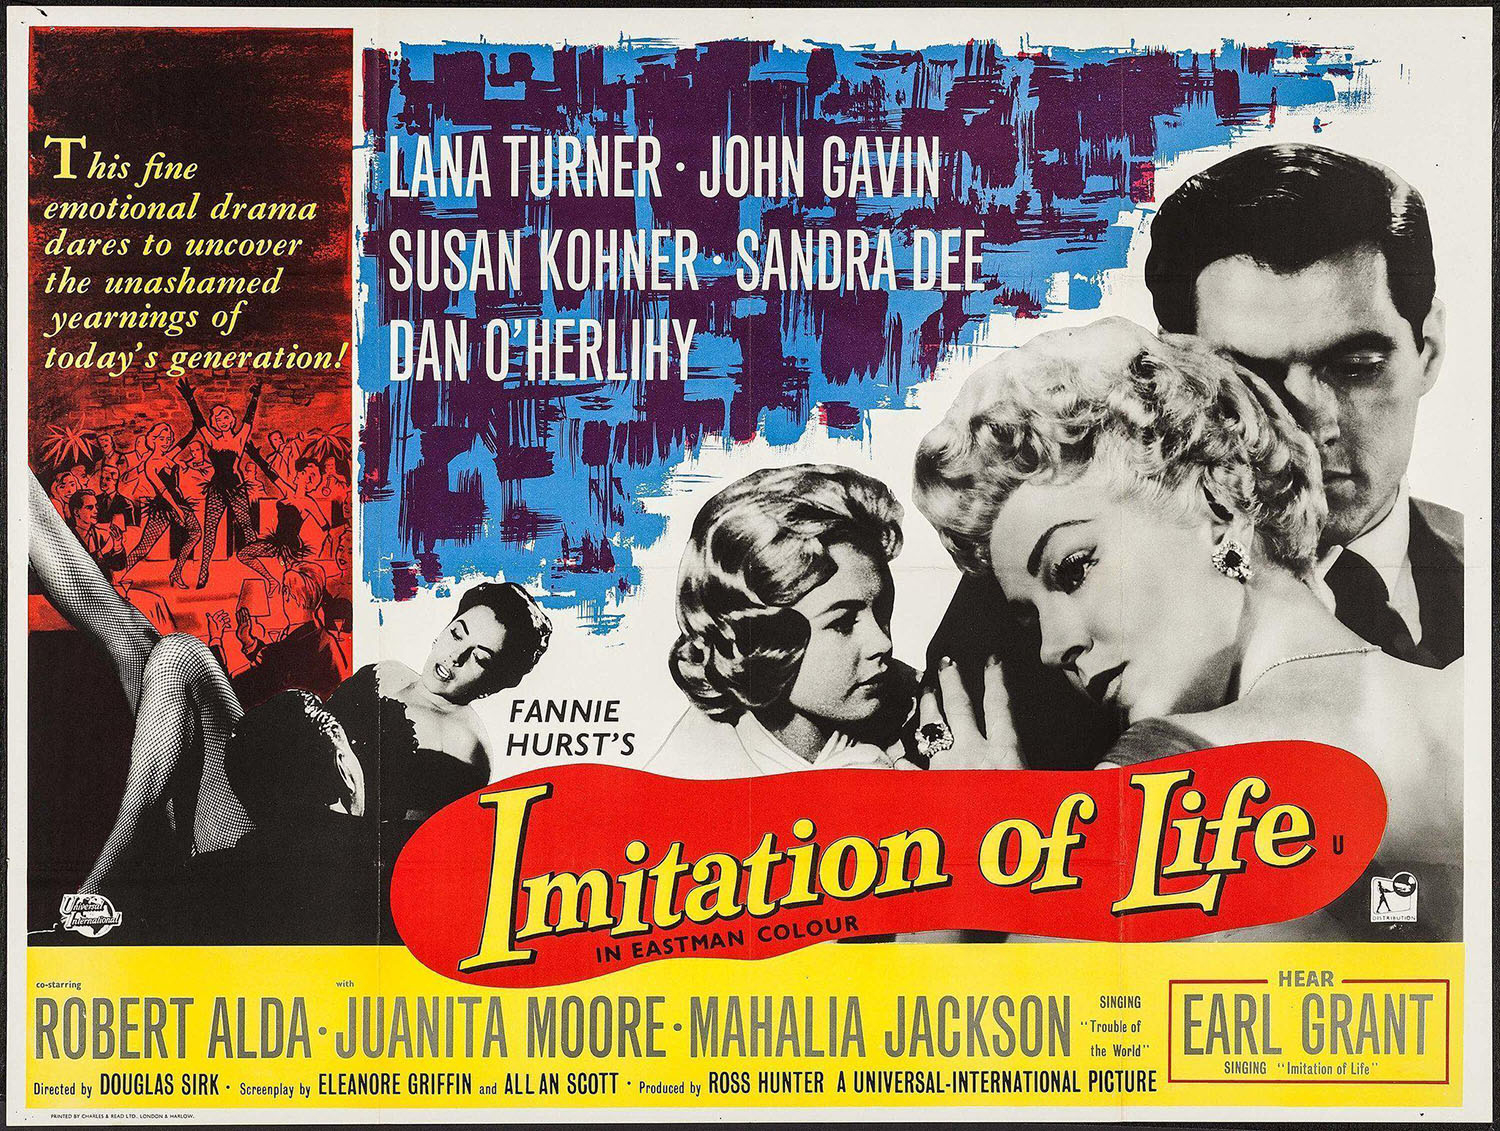 Leave Them Wanting More: Douglas Sirk and Imitation of Life :: SteynOnline